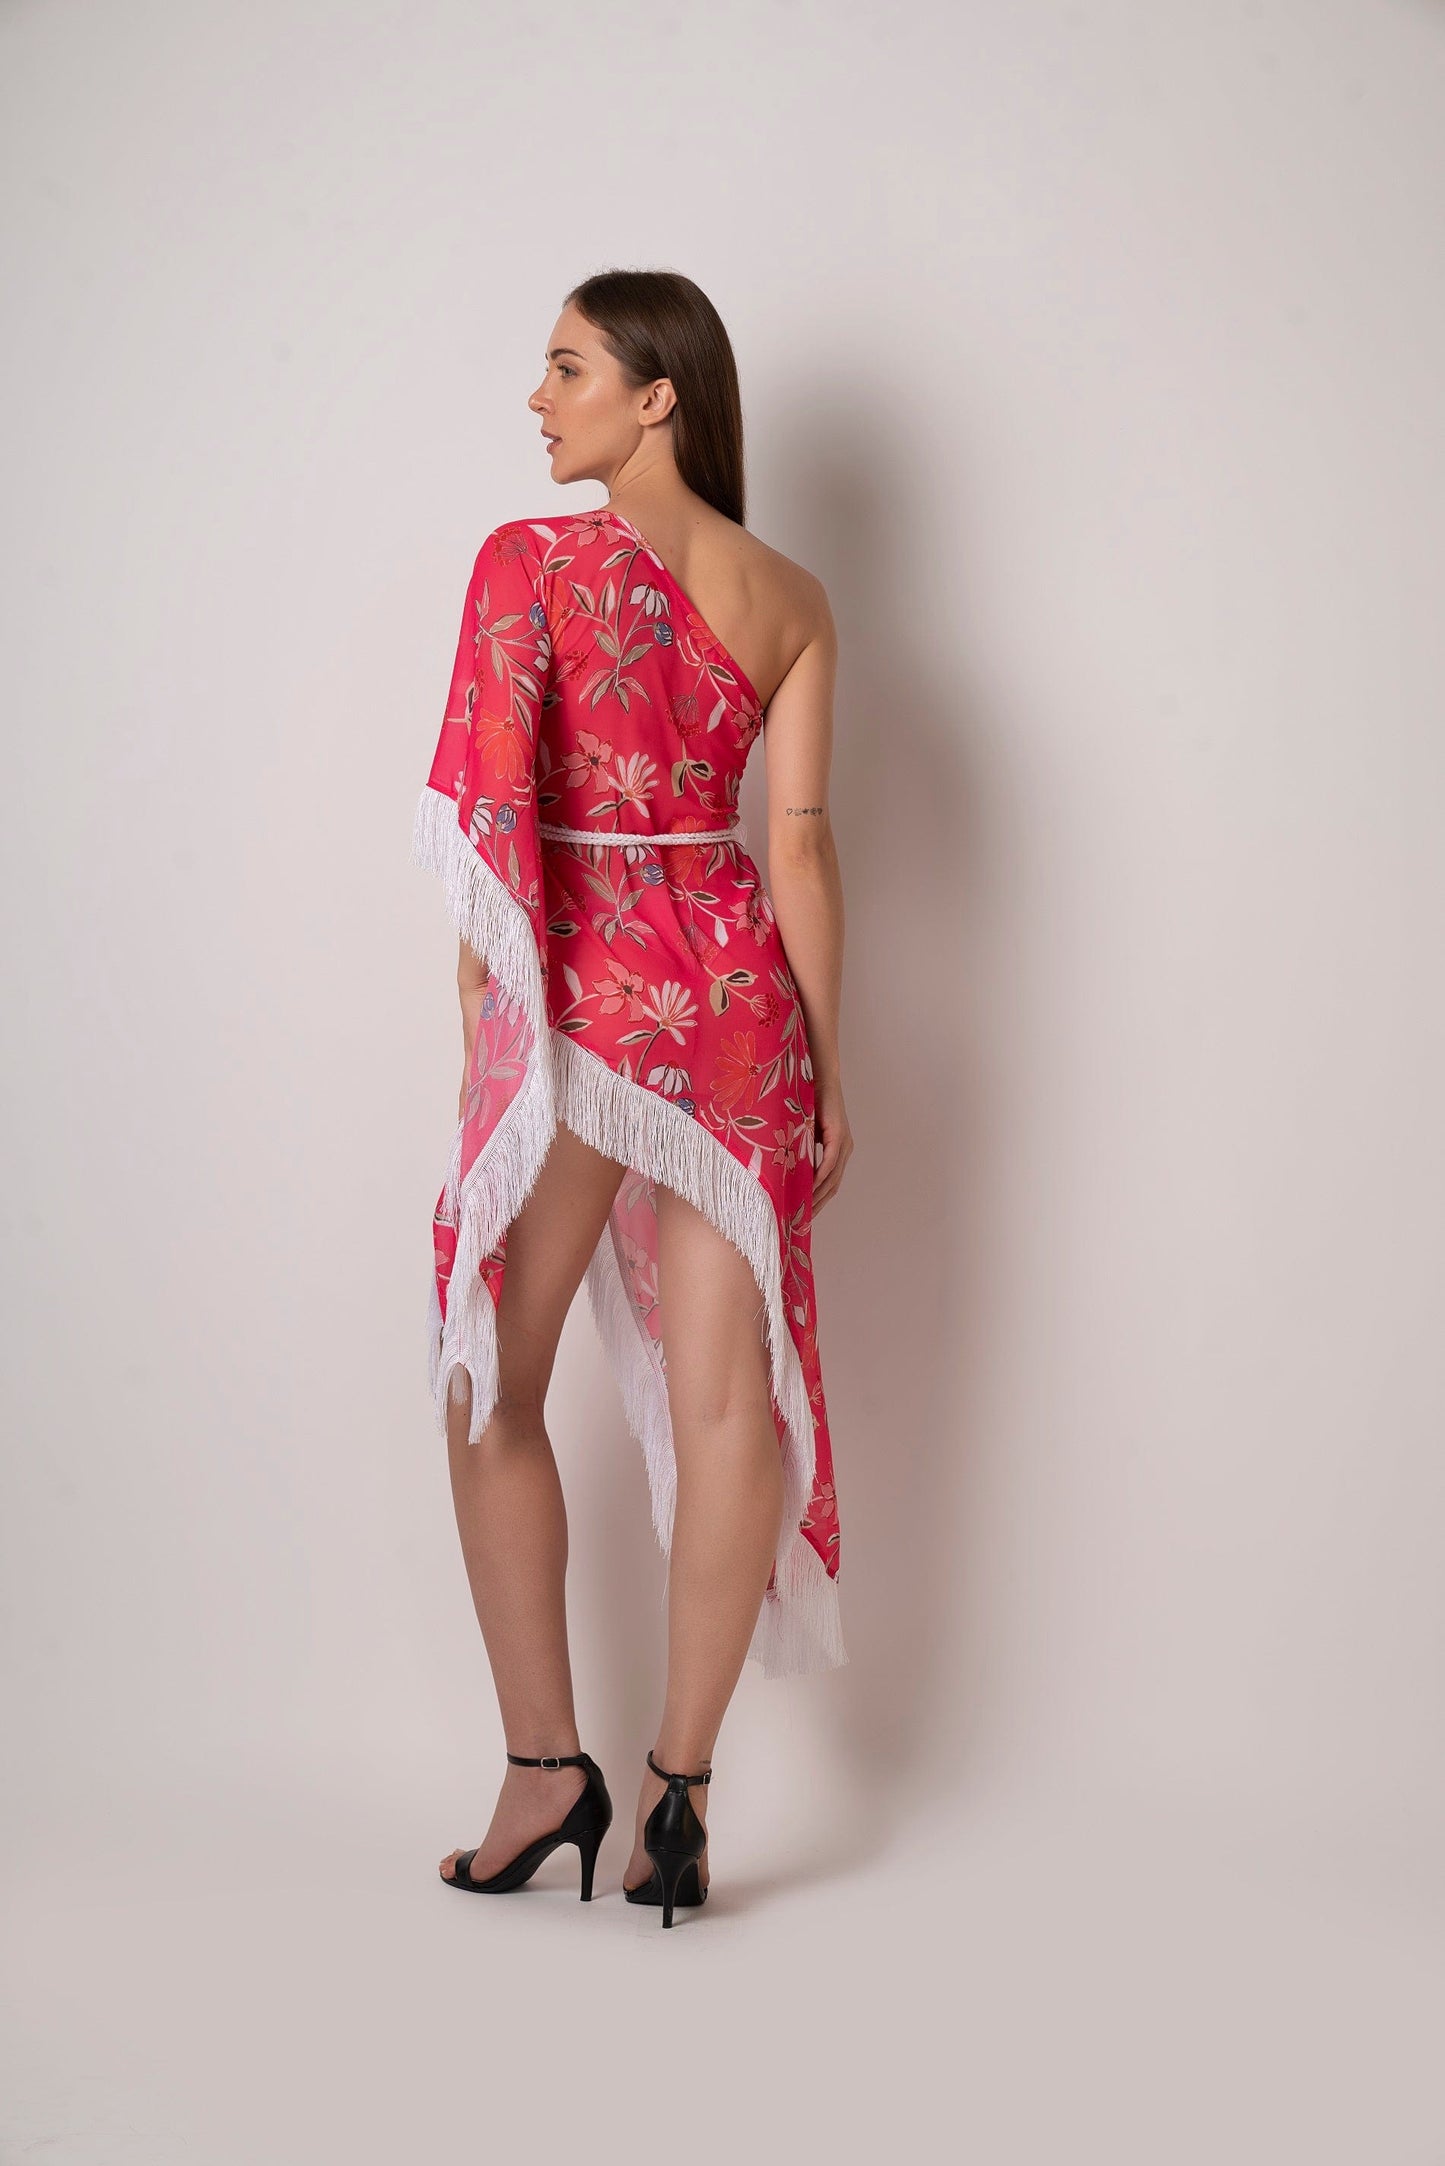 Designer kaftan dress is made of luxurious georgette fabric. It's a perfect resort wear or vacation dress for women